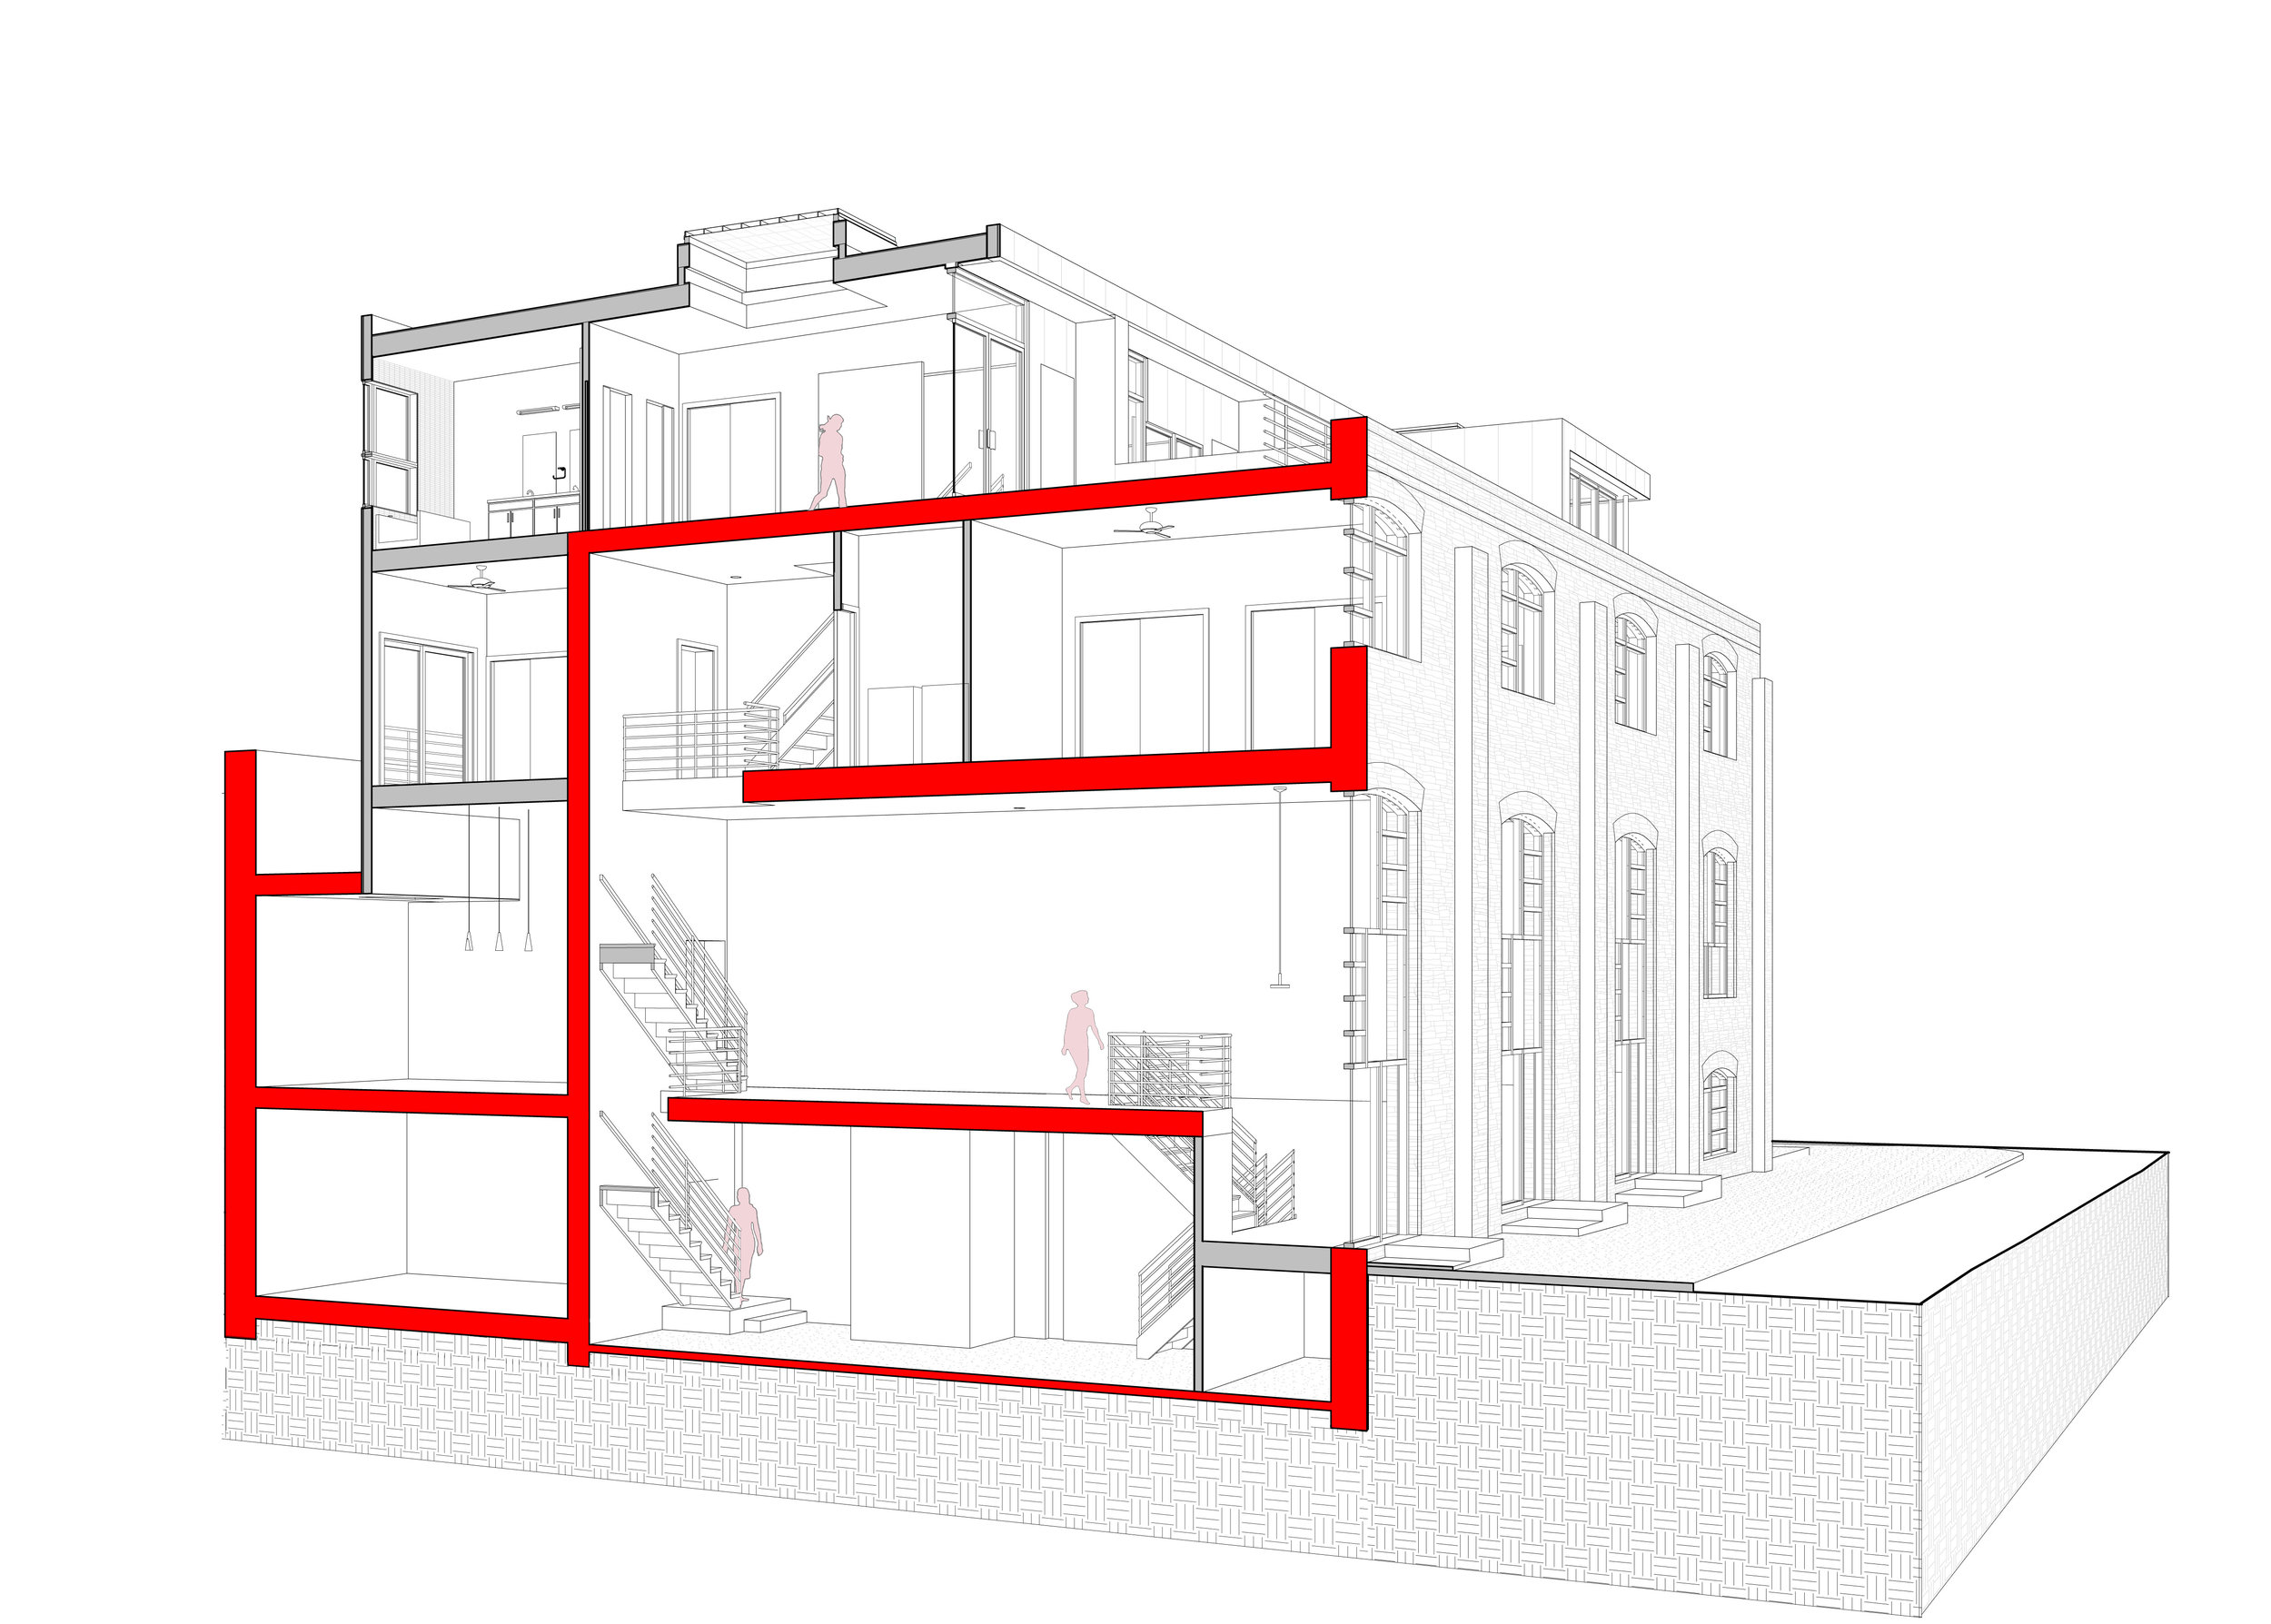 Building Section; the existing building profile is shown in red, and new construction is shown in gray